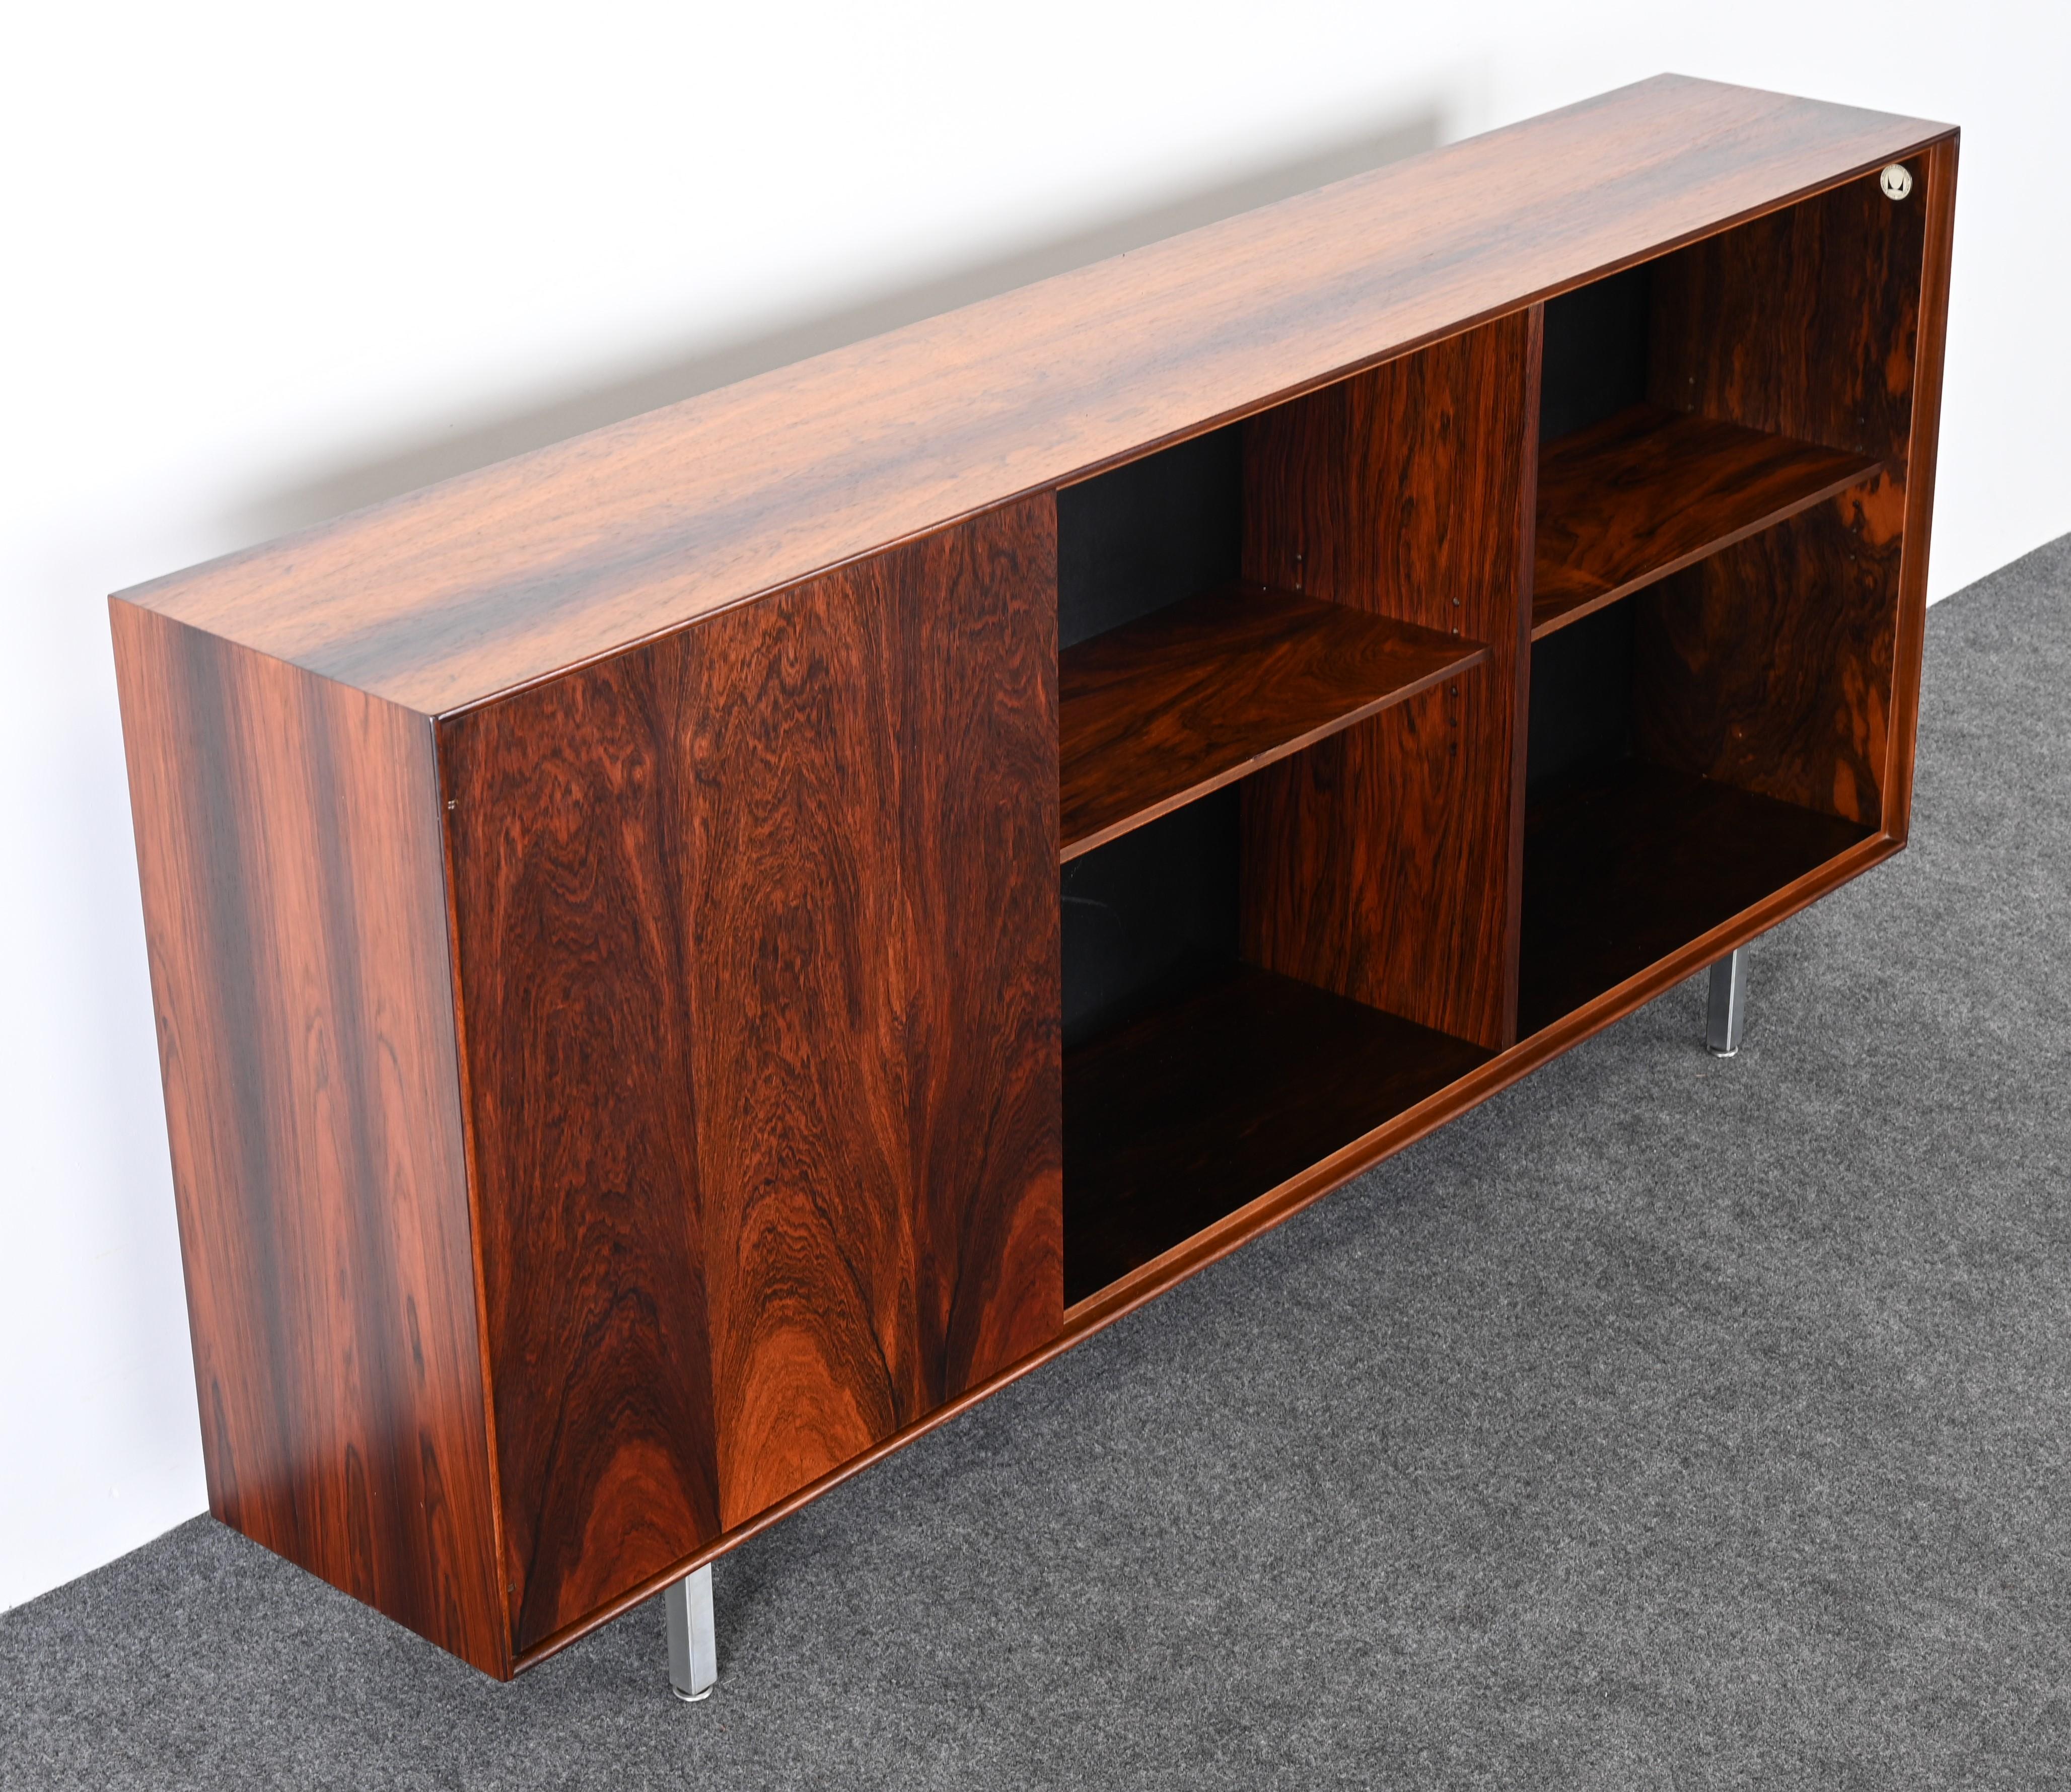 Rosewood Thin Edge Bookshelf by George Nelson for Herman Miller, 1950s For Sale 4